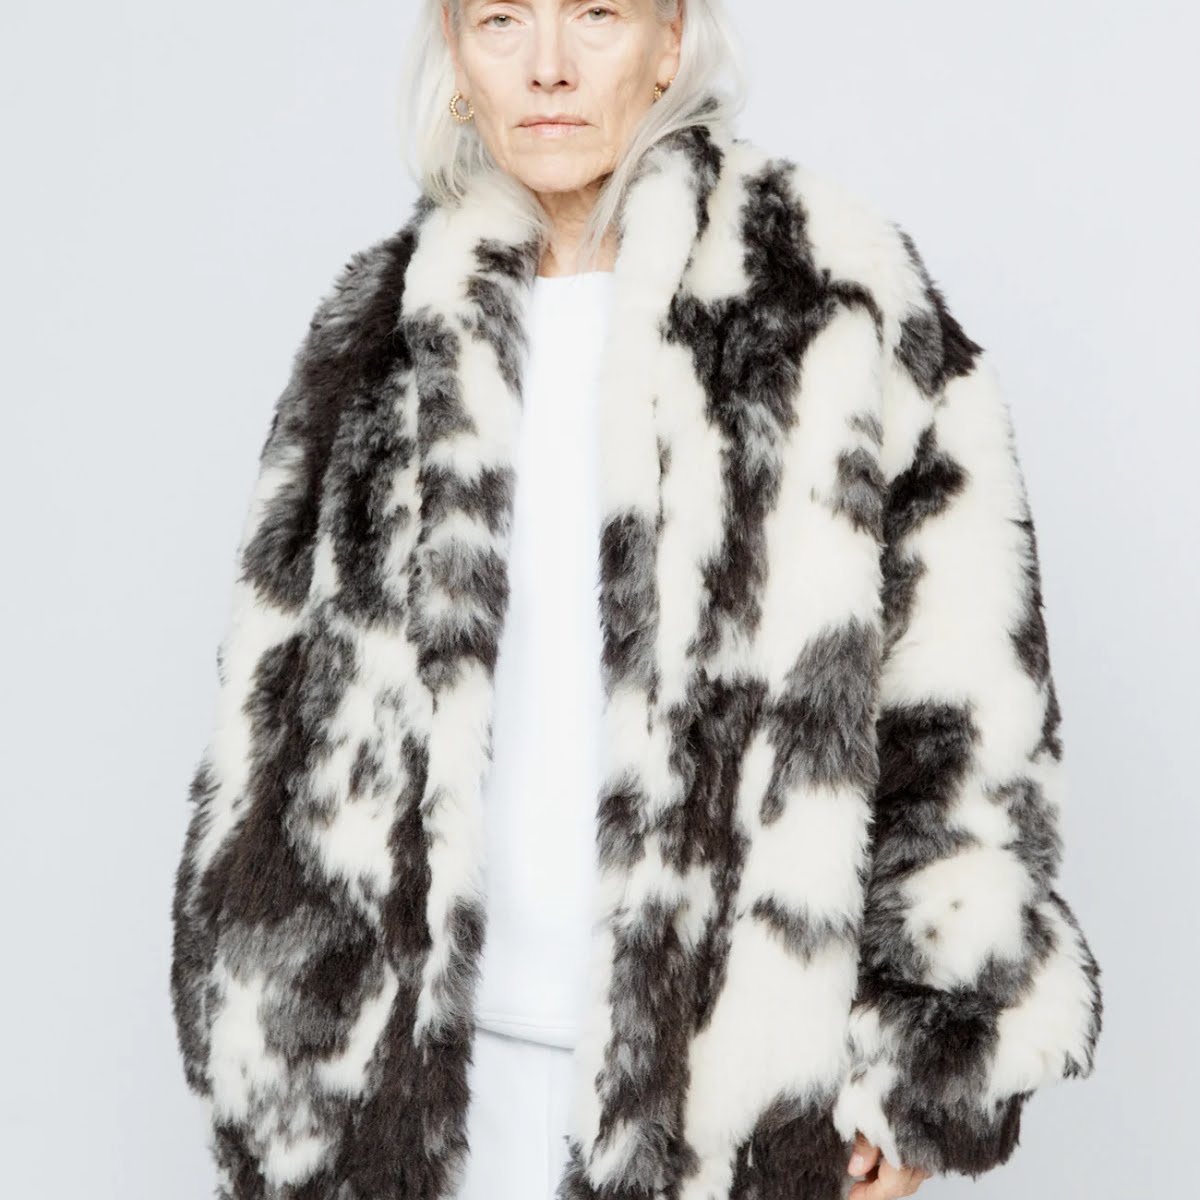 Matches Faux Fur Bomber, €925.67